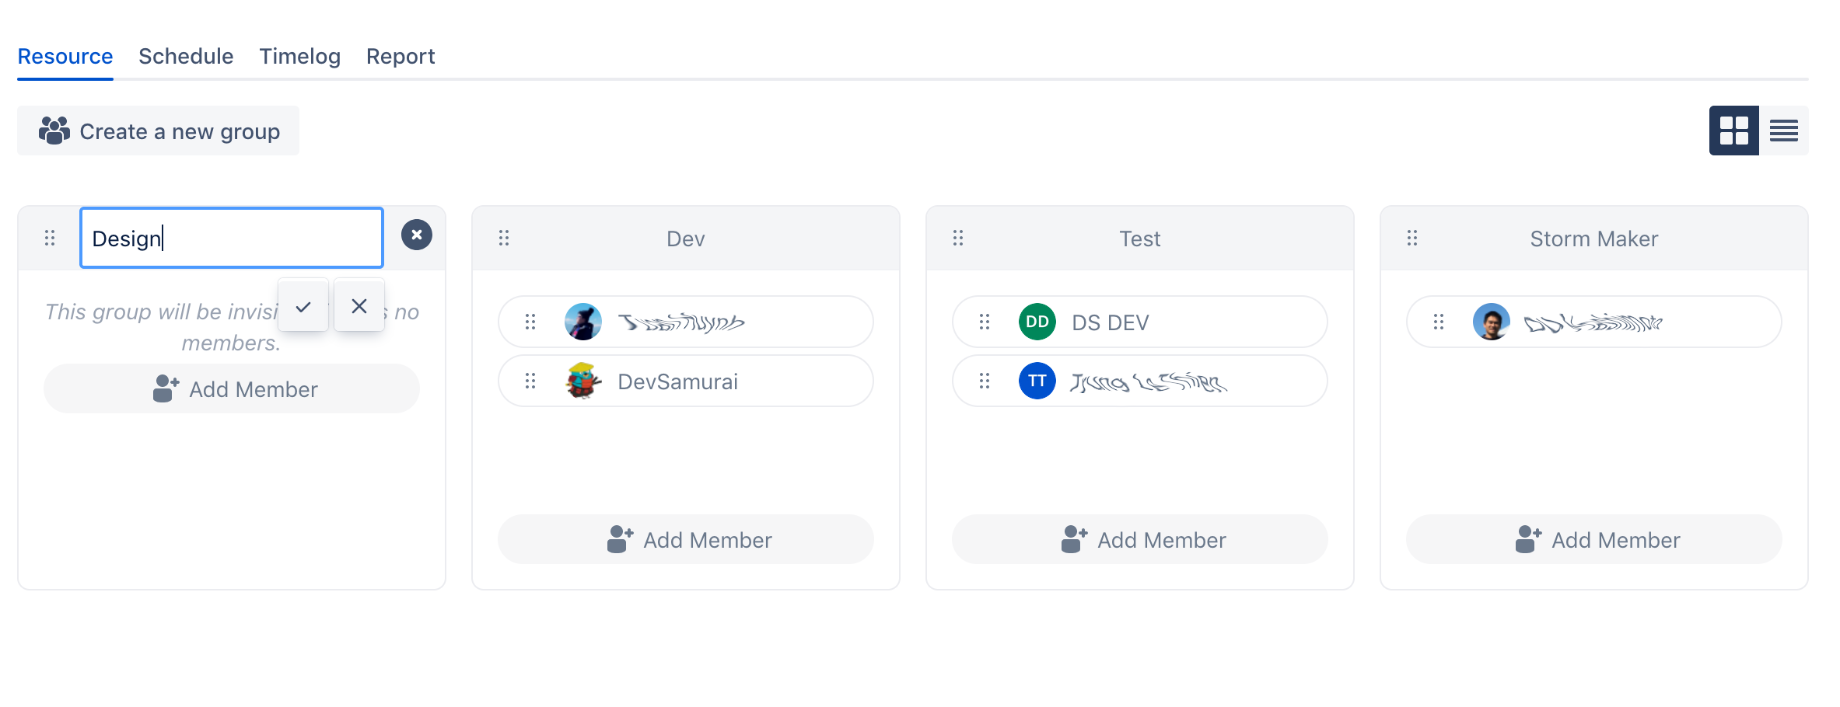 Create and manage Groups of members in the project